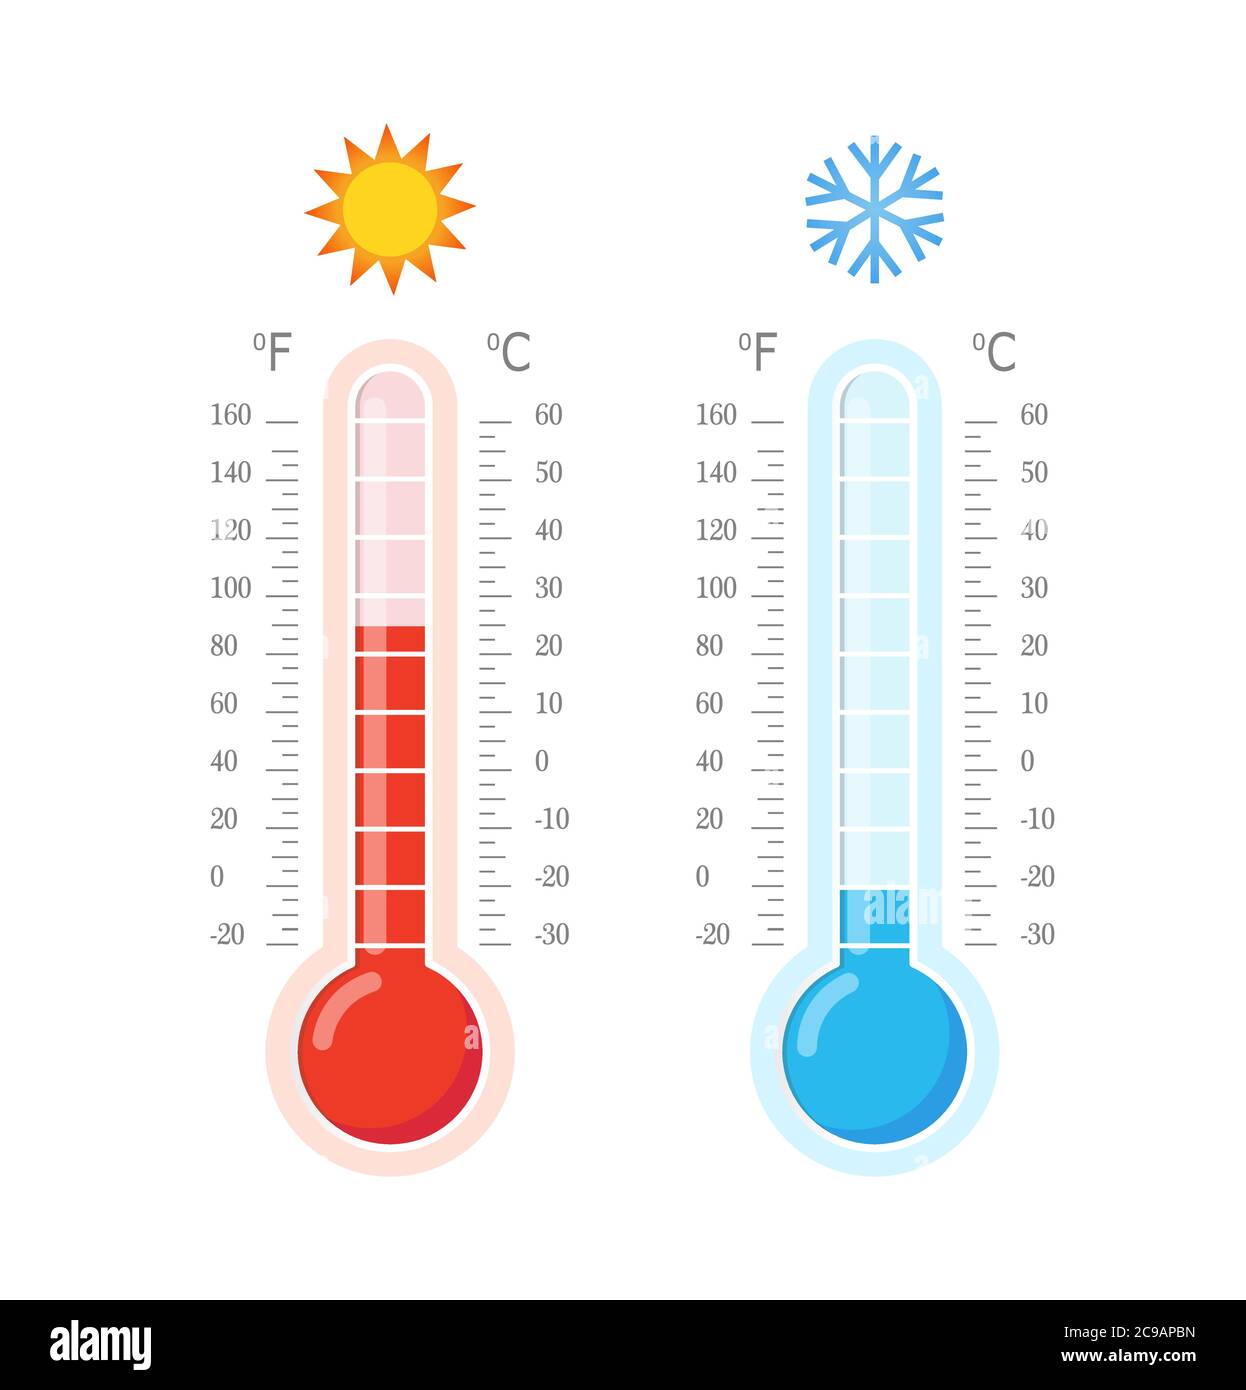 https://c8.alamy.com/comp/2C9APBN/hot-and-cold-thermometers-blue-and-red-thermometers-celsius-and-fahrenheit-meteorology-thermometers-measuring-heat-and-cold-vector-illustration-2C9APBN.jpg